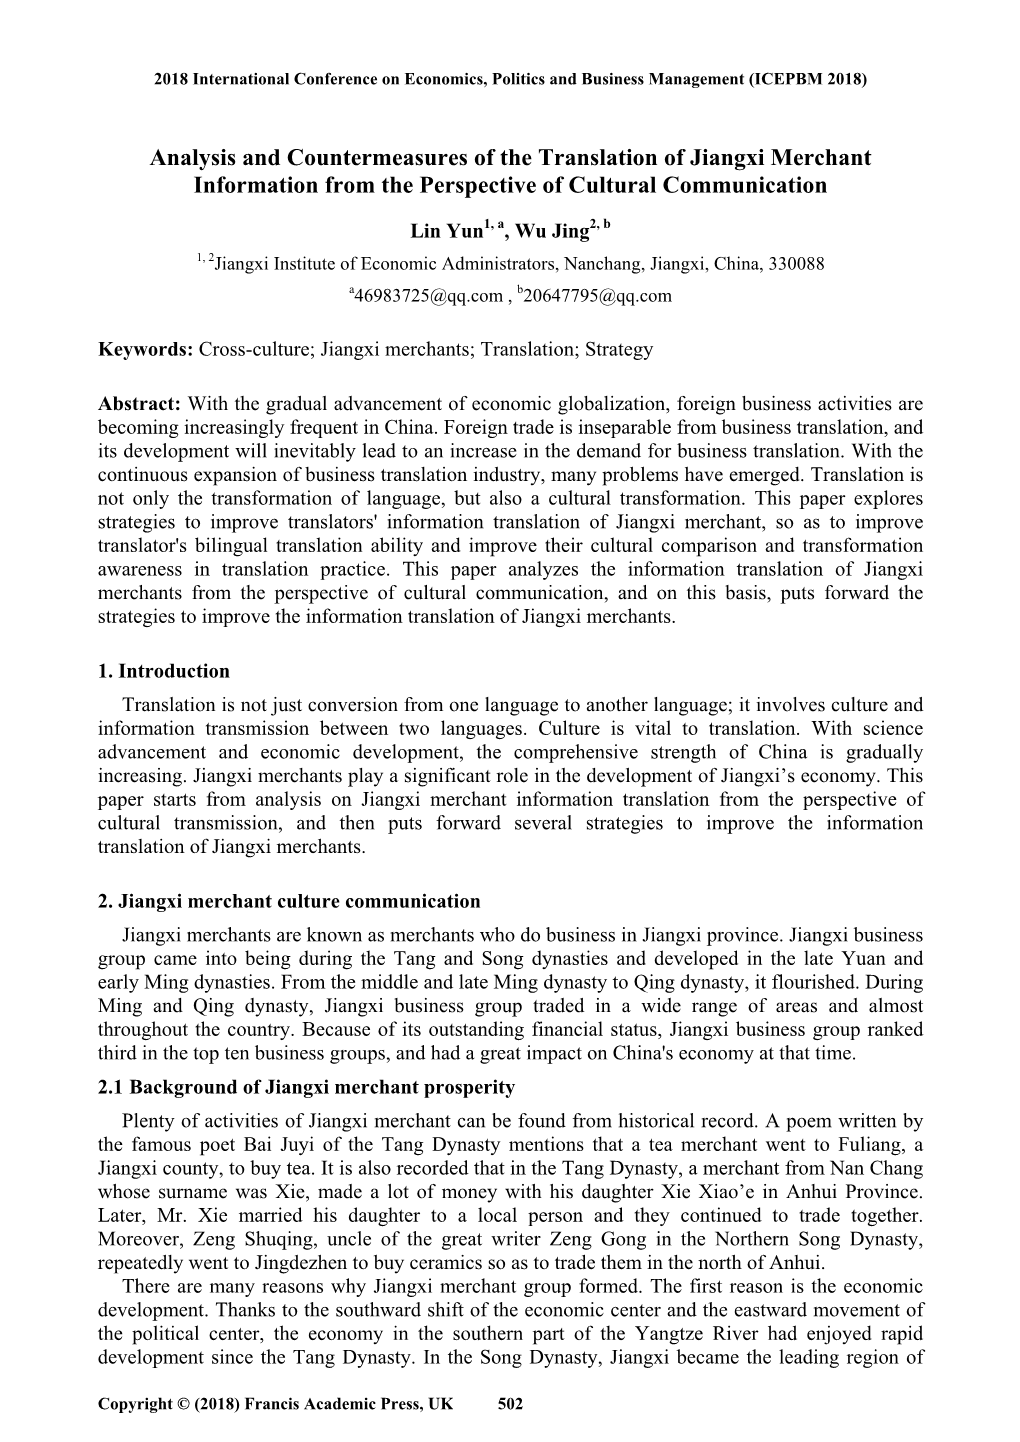 Analysis and Countermeasures of the Translation of Jiangxi Merchant Information from the Perspective of Cultural Communication